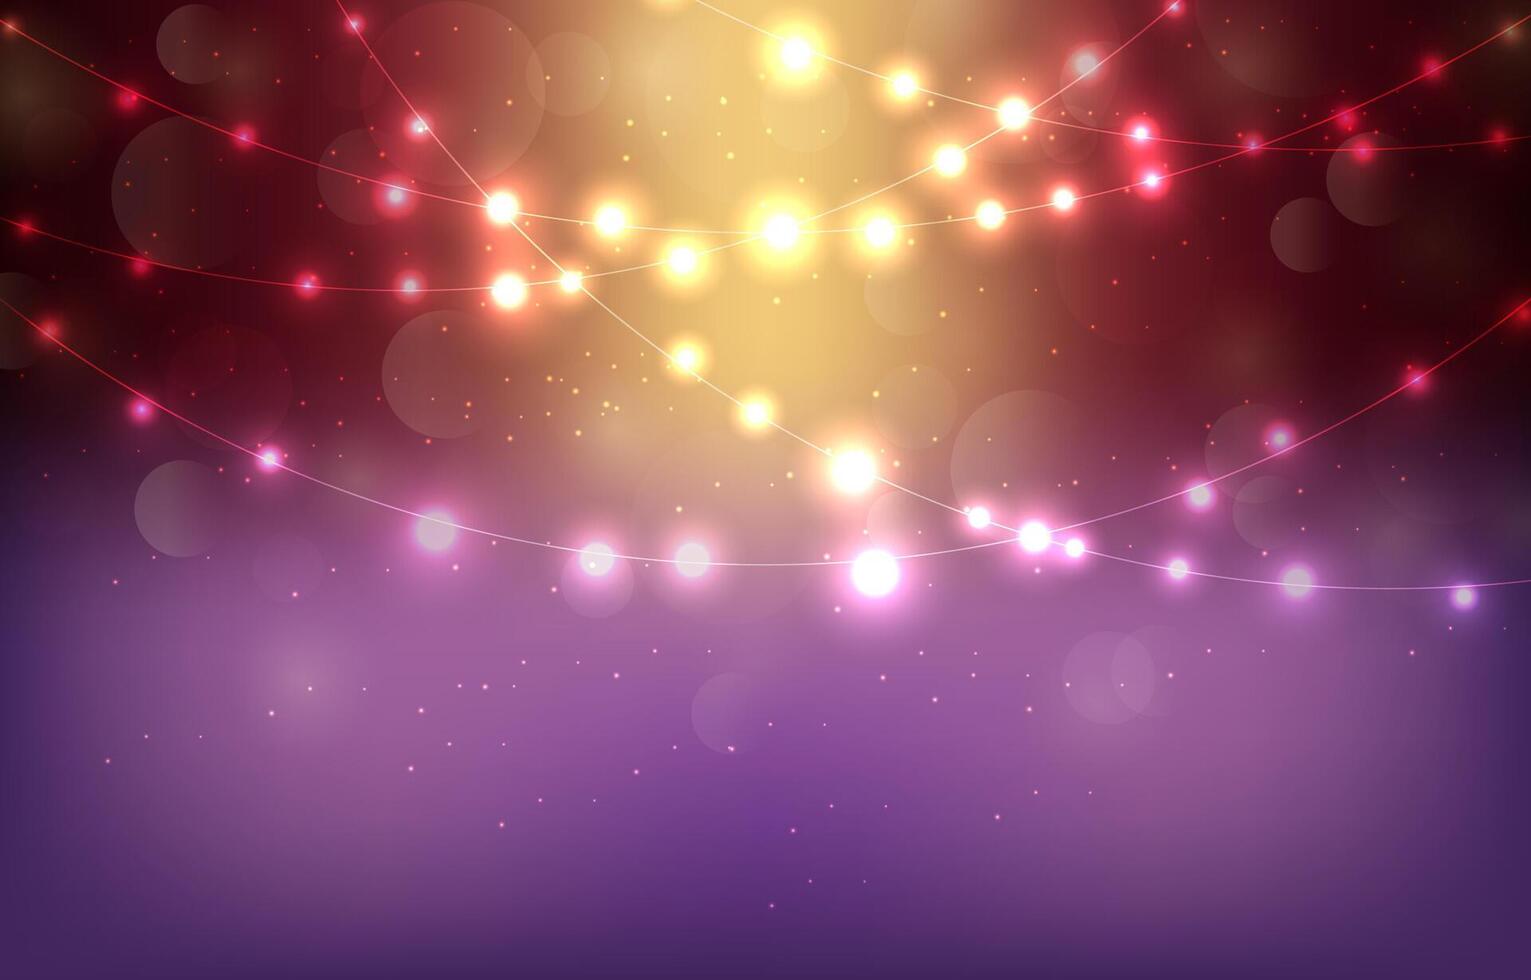 Glowing Fairy Lights and Light Bulb Background For Chrismas vector